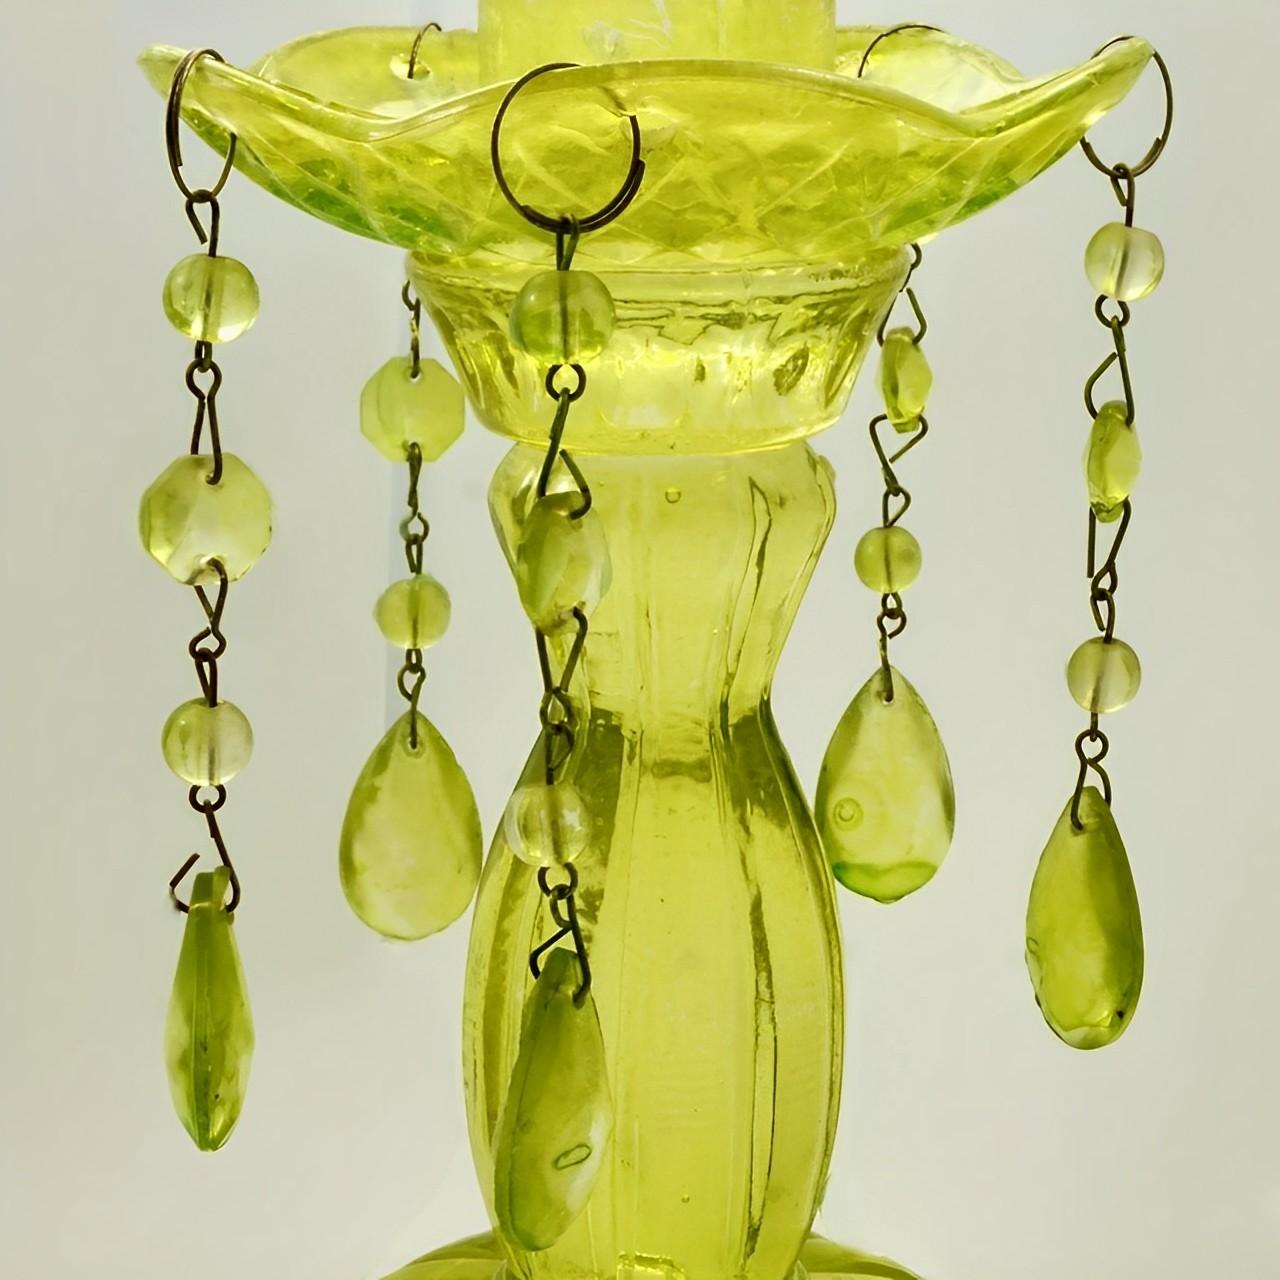 
Stylish pair of heavy chartreuse pressed glass French candlesticks with drops. They are height 16.5 cm / 6.5 inches, and the diameter of the base is 9.9 cm / 3.9 inches. One of the candle holders has some cracking, it is stable. We have given the